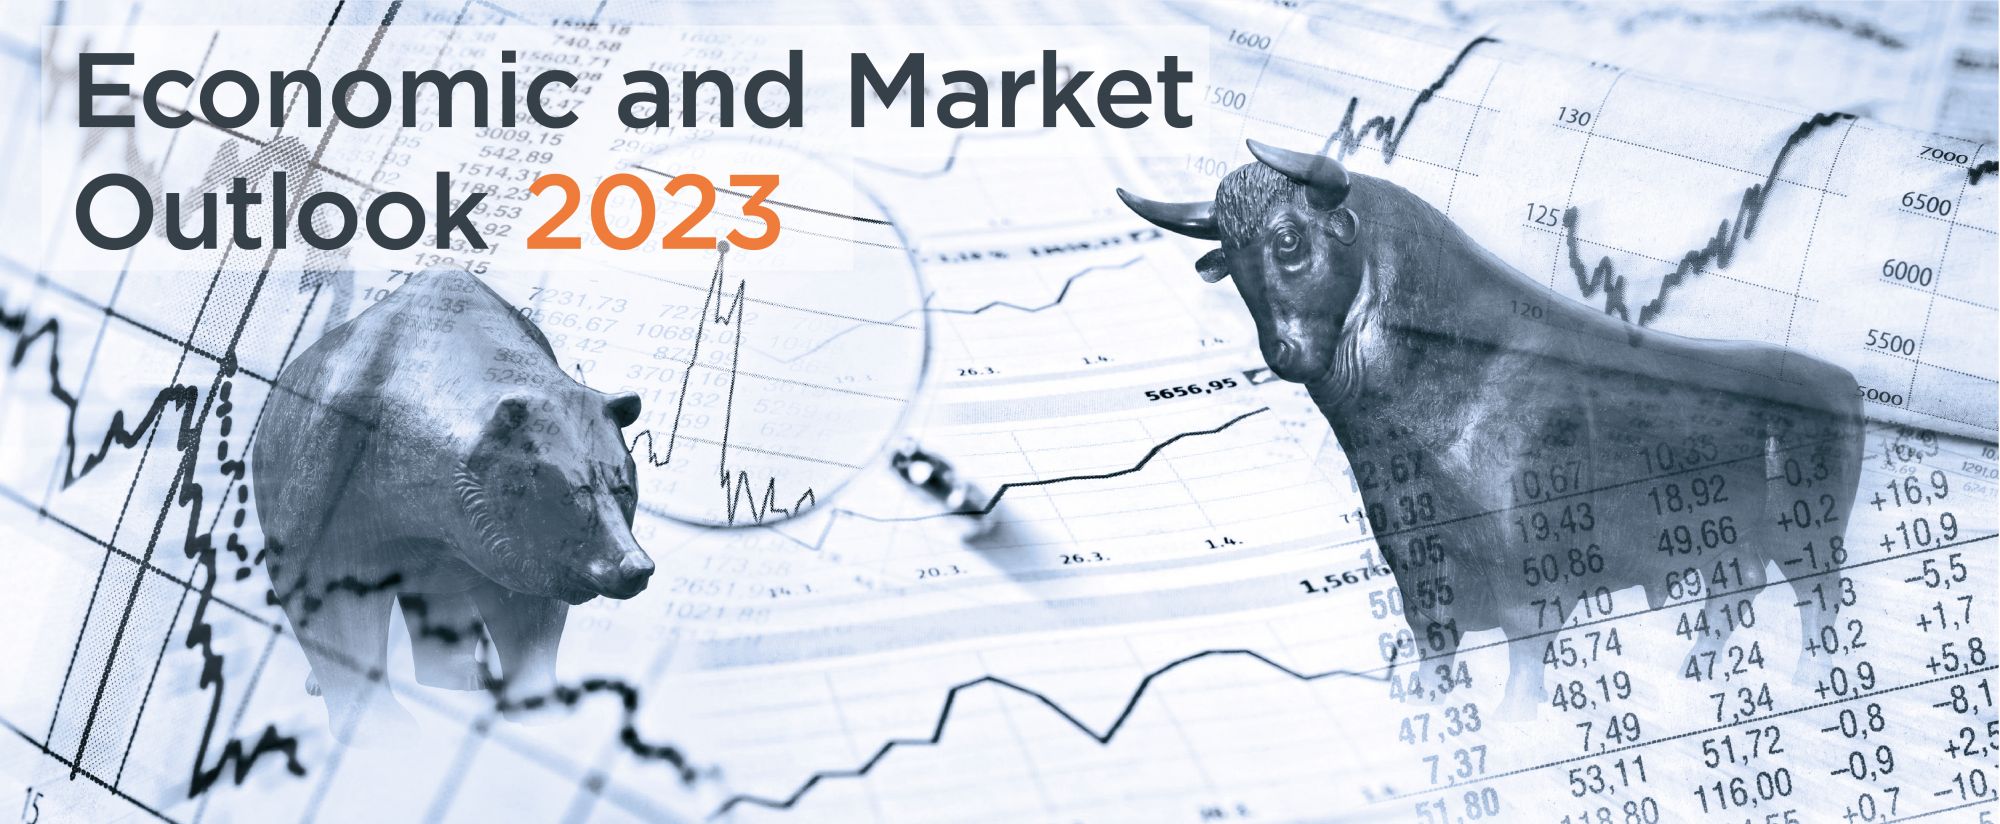 Economic and Market Outlook 2023